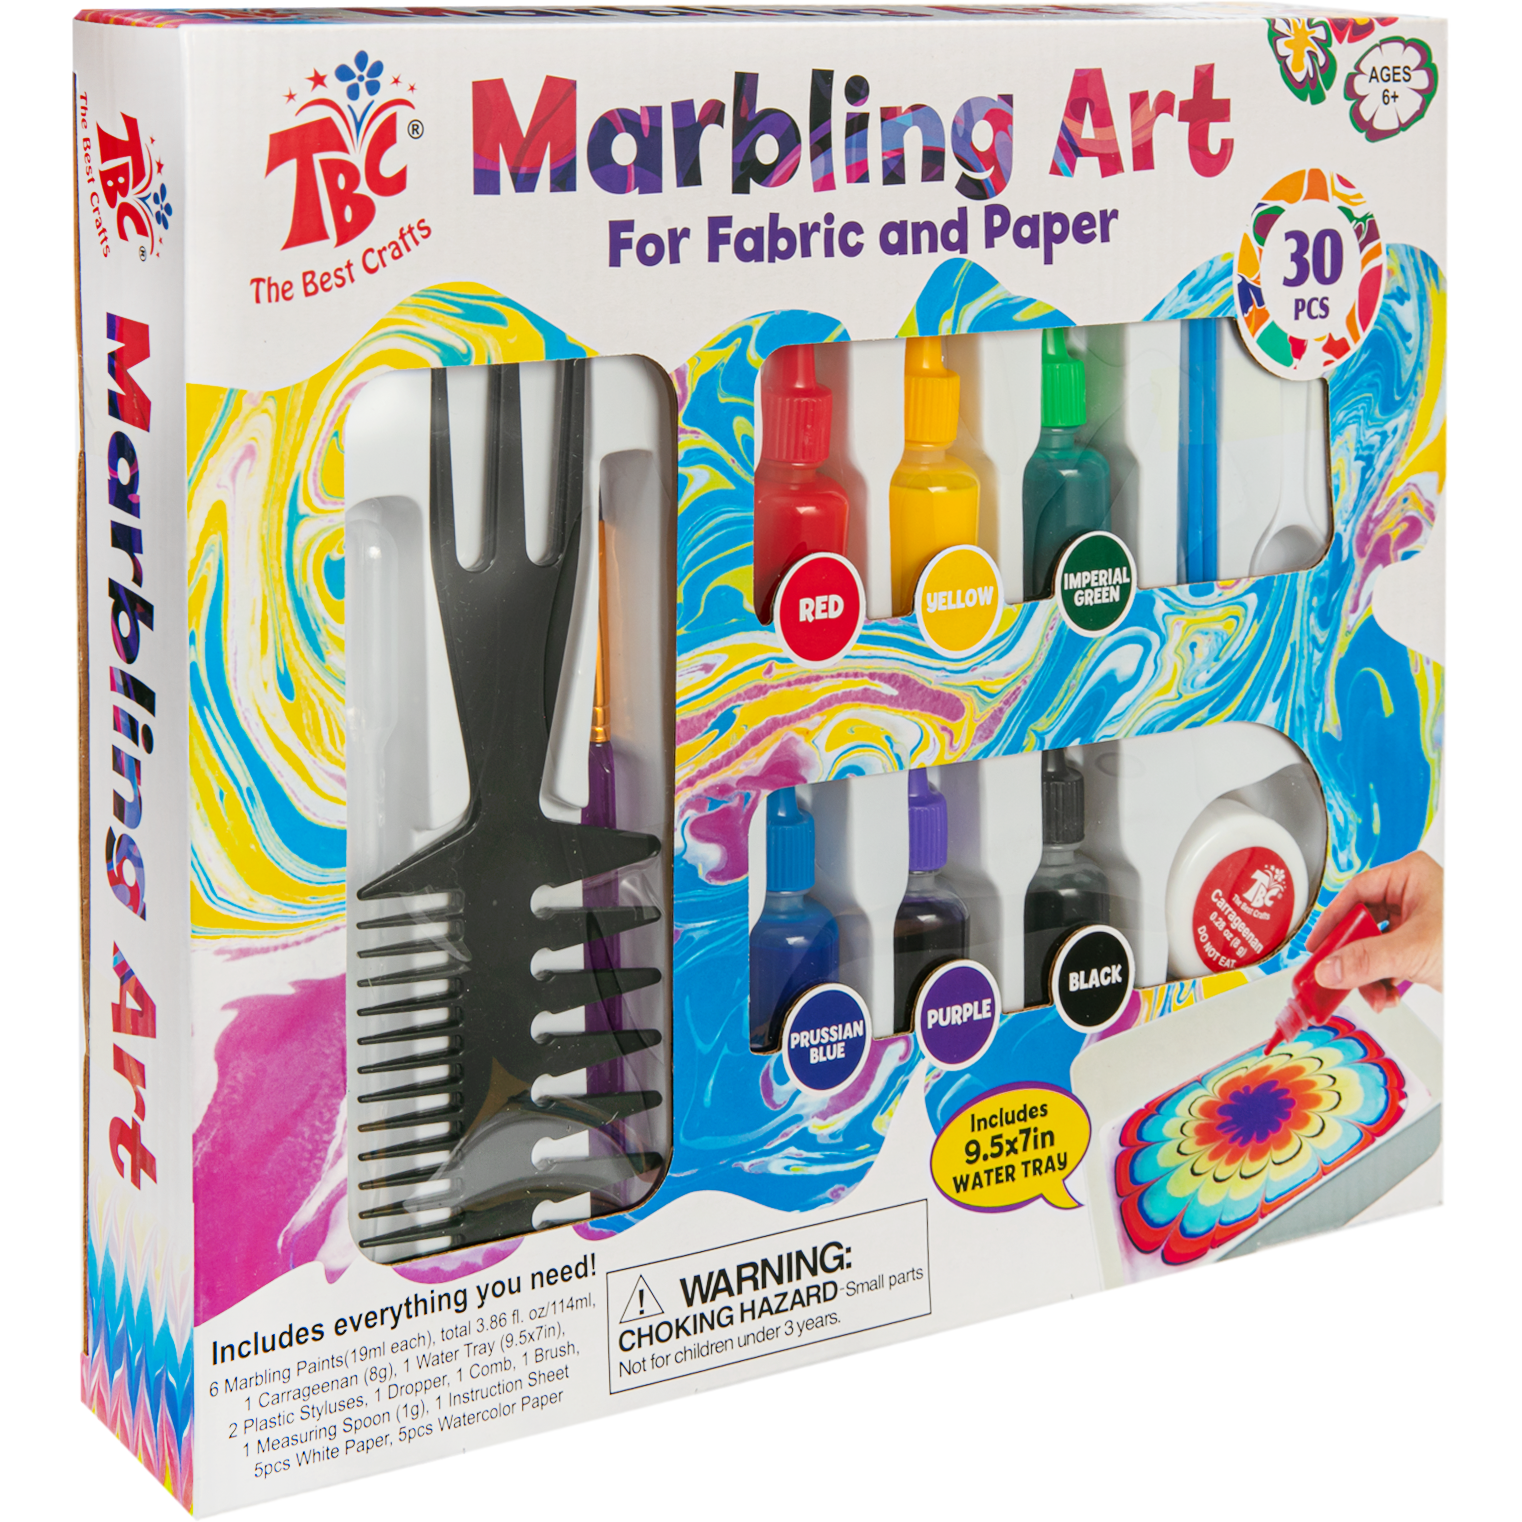 TBC The Best Crafts Marbling Art Paint Kit, 6 India